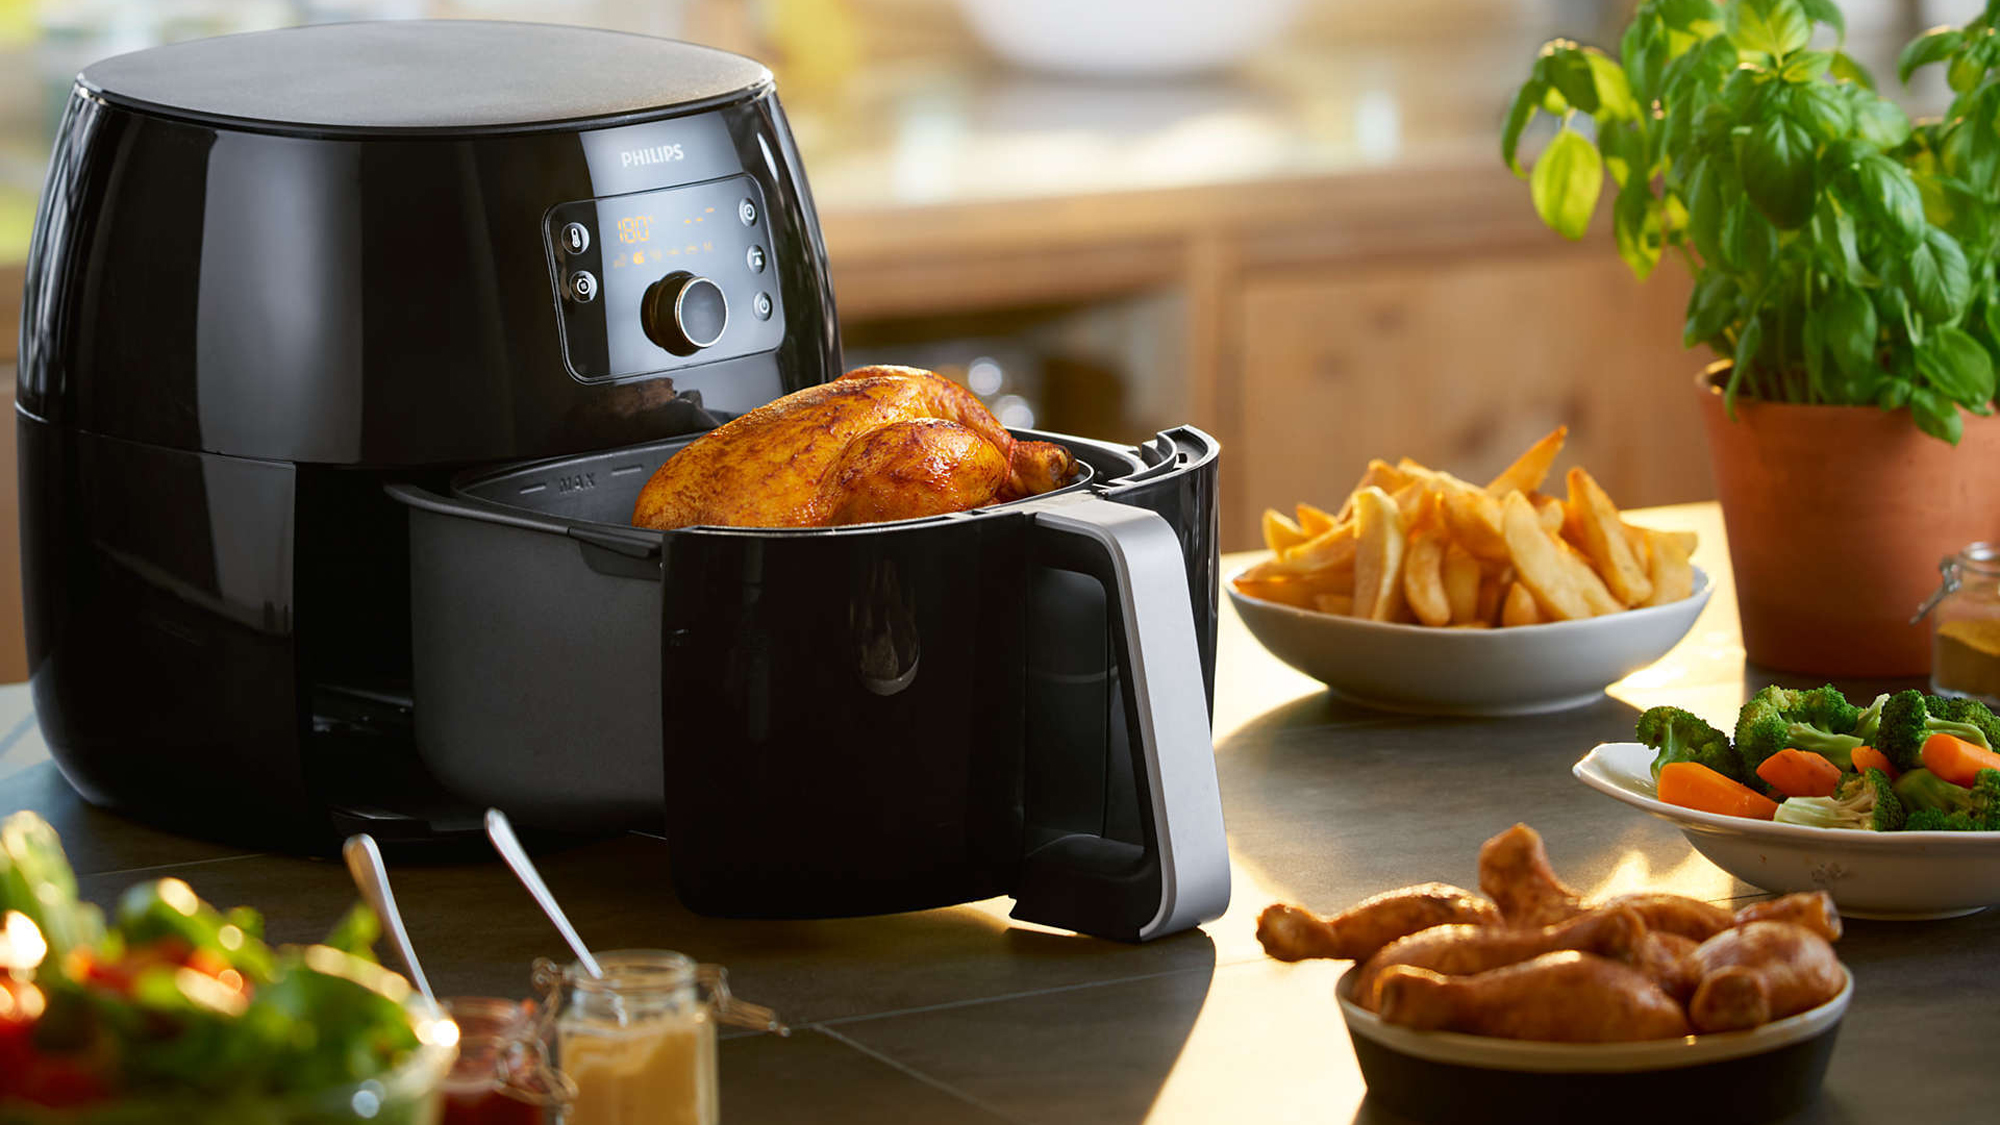 Philips Premium Airfryer XXL with Fat Removal Technology, 3lb/7qt, Black,  HD9650/96 with Philips Kitchen Appliances Master Accessory Kit with Baking